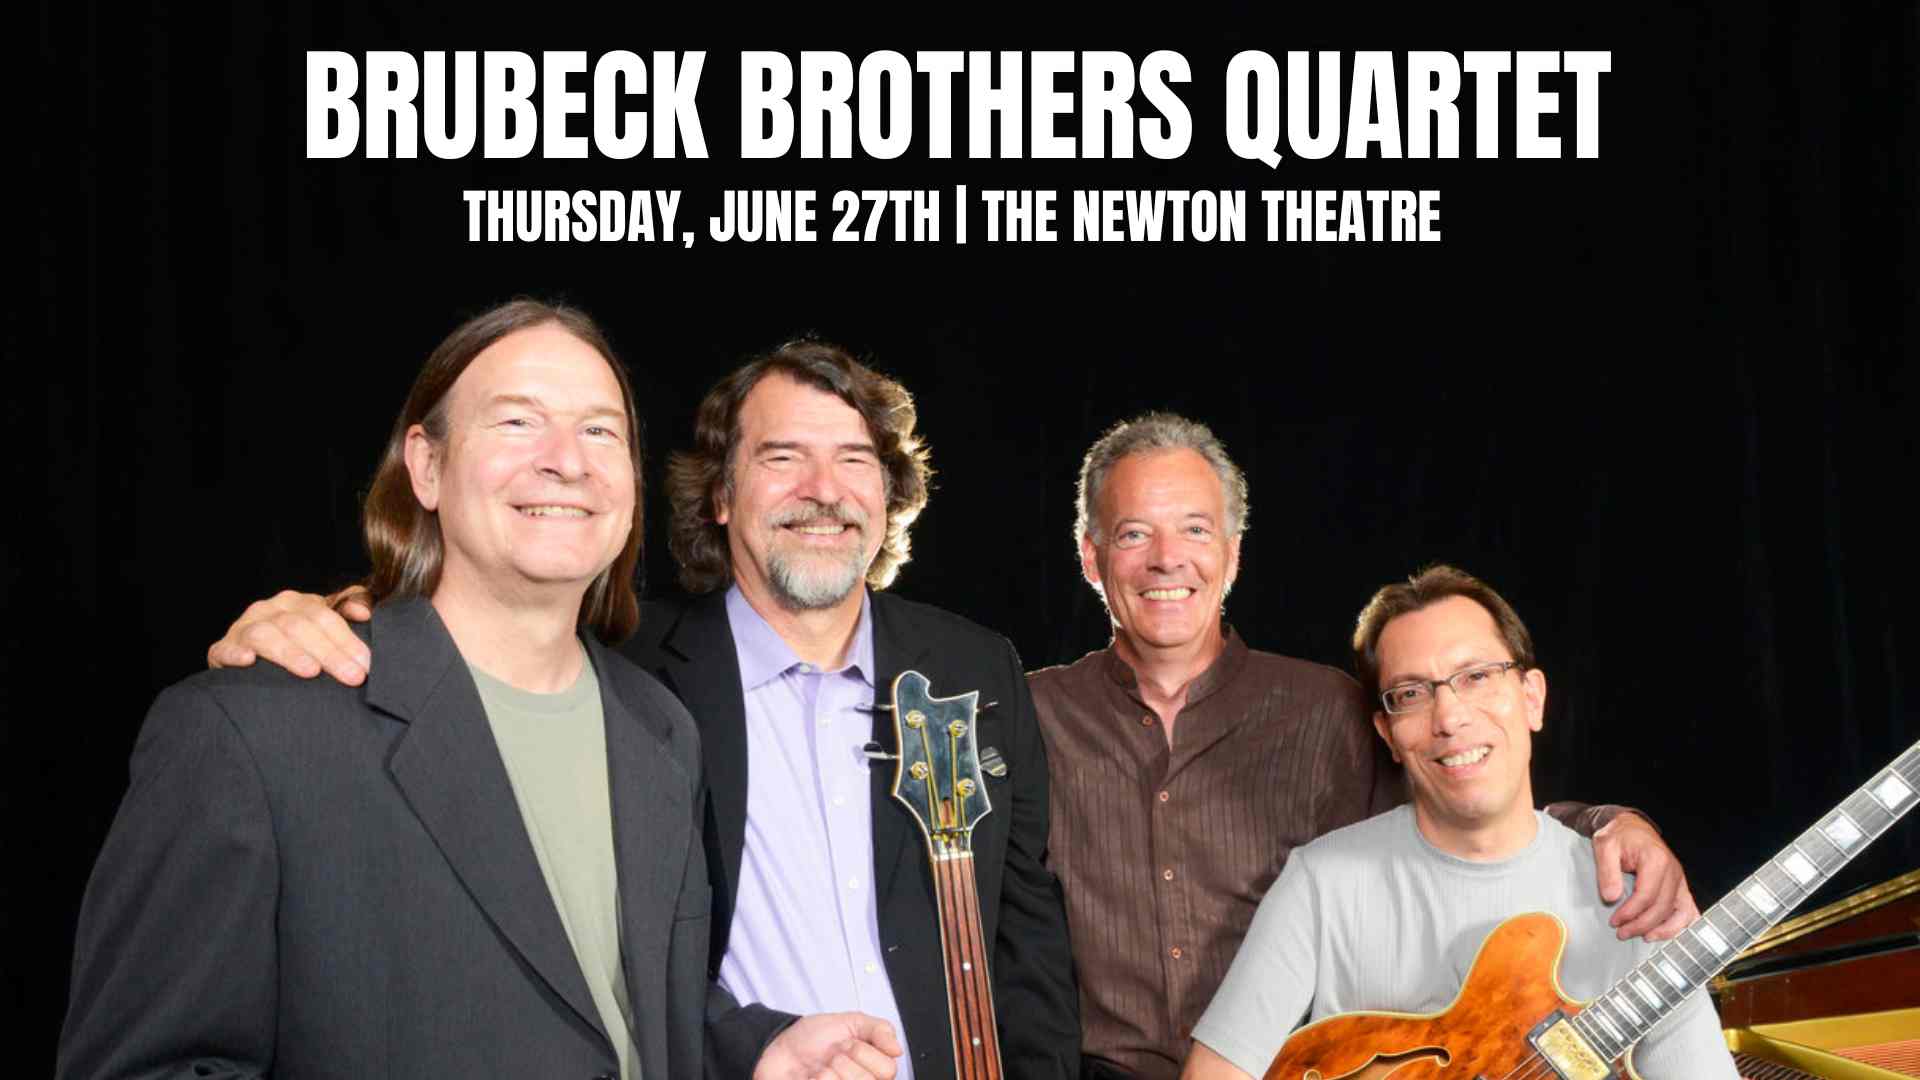 Brubeck Brothers Quartet plays The Newton Theatre on Thursday, June 27th.